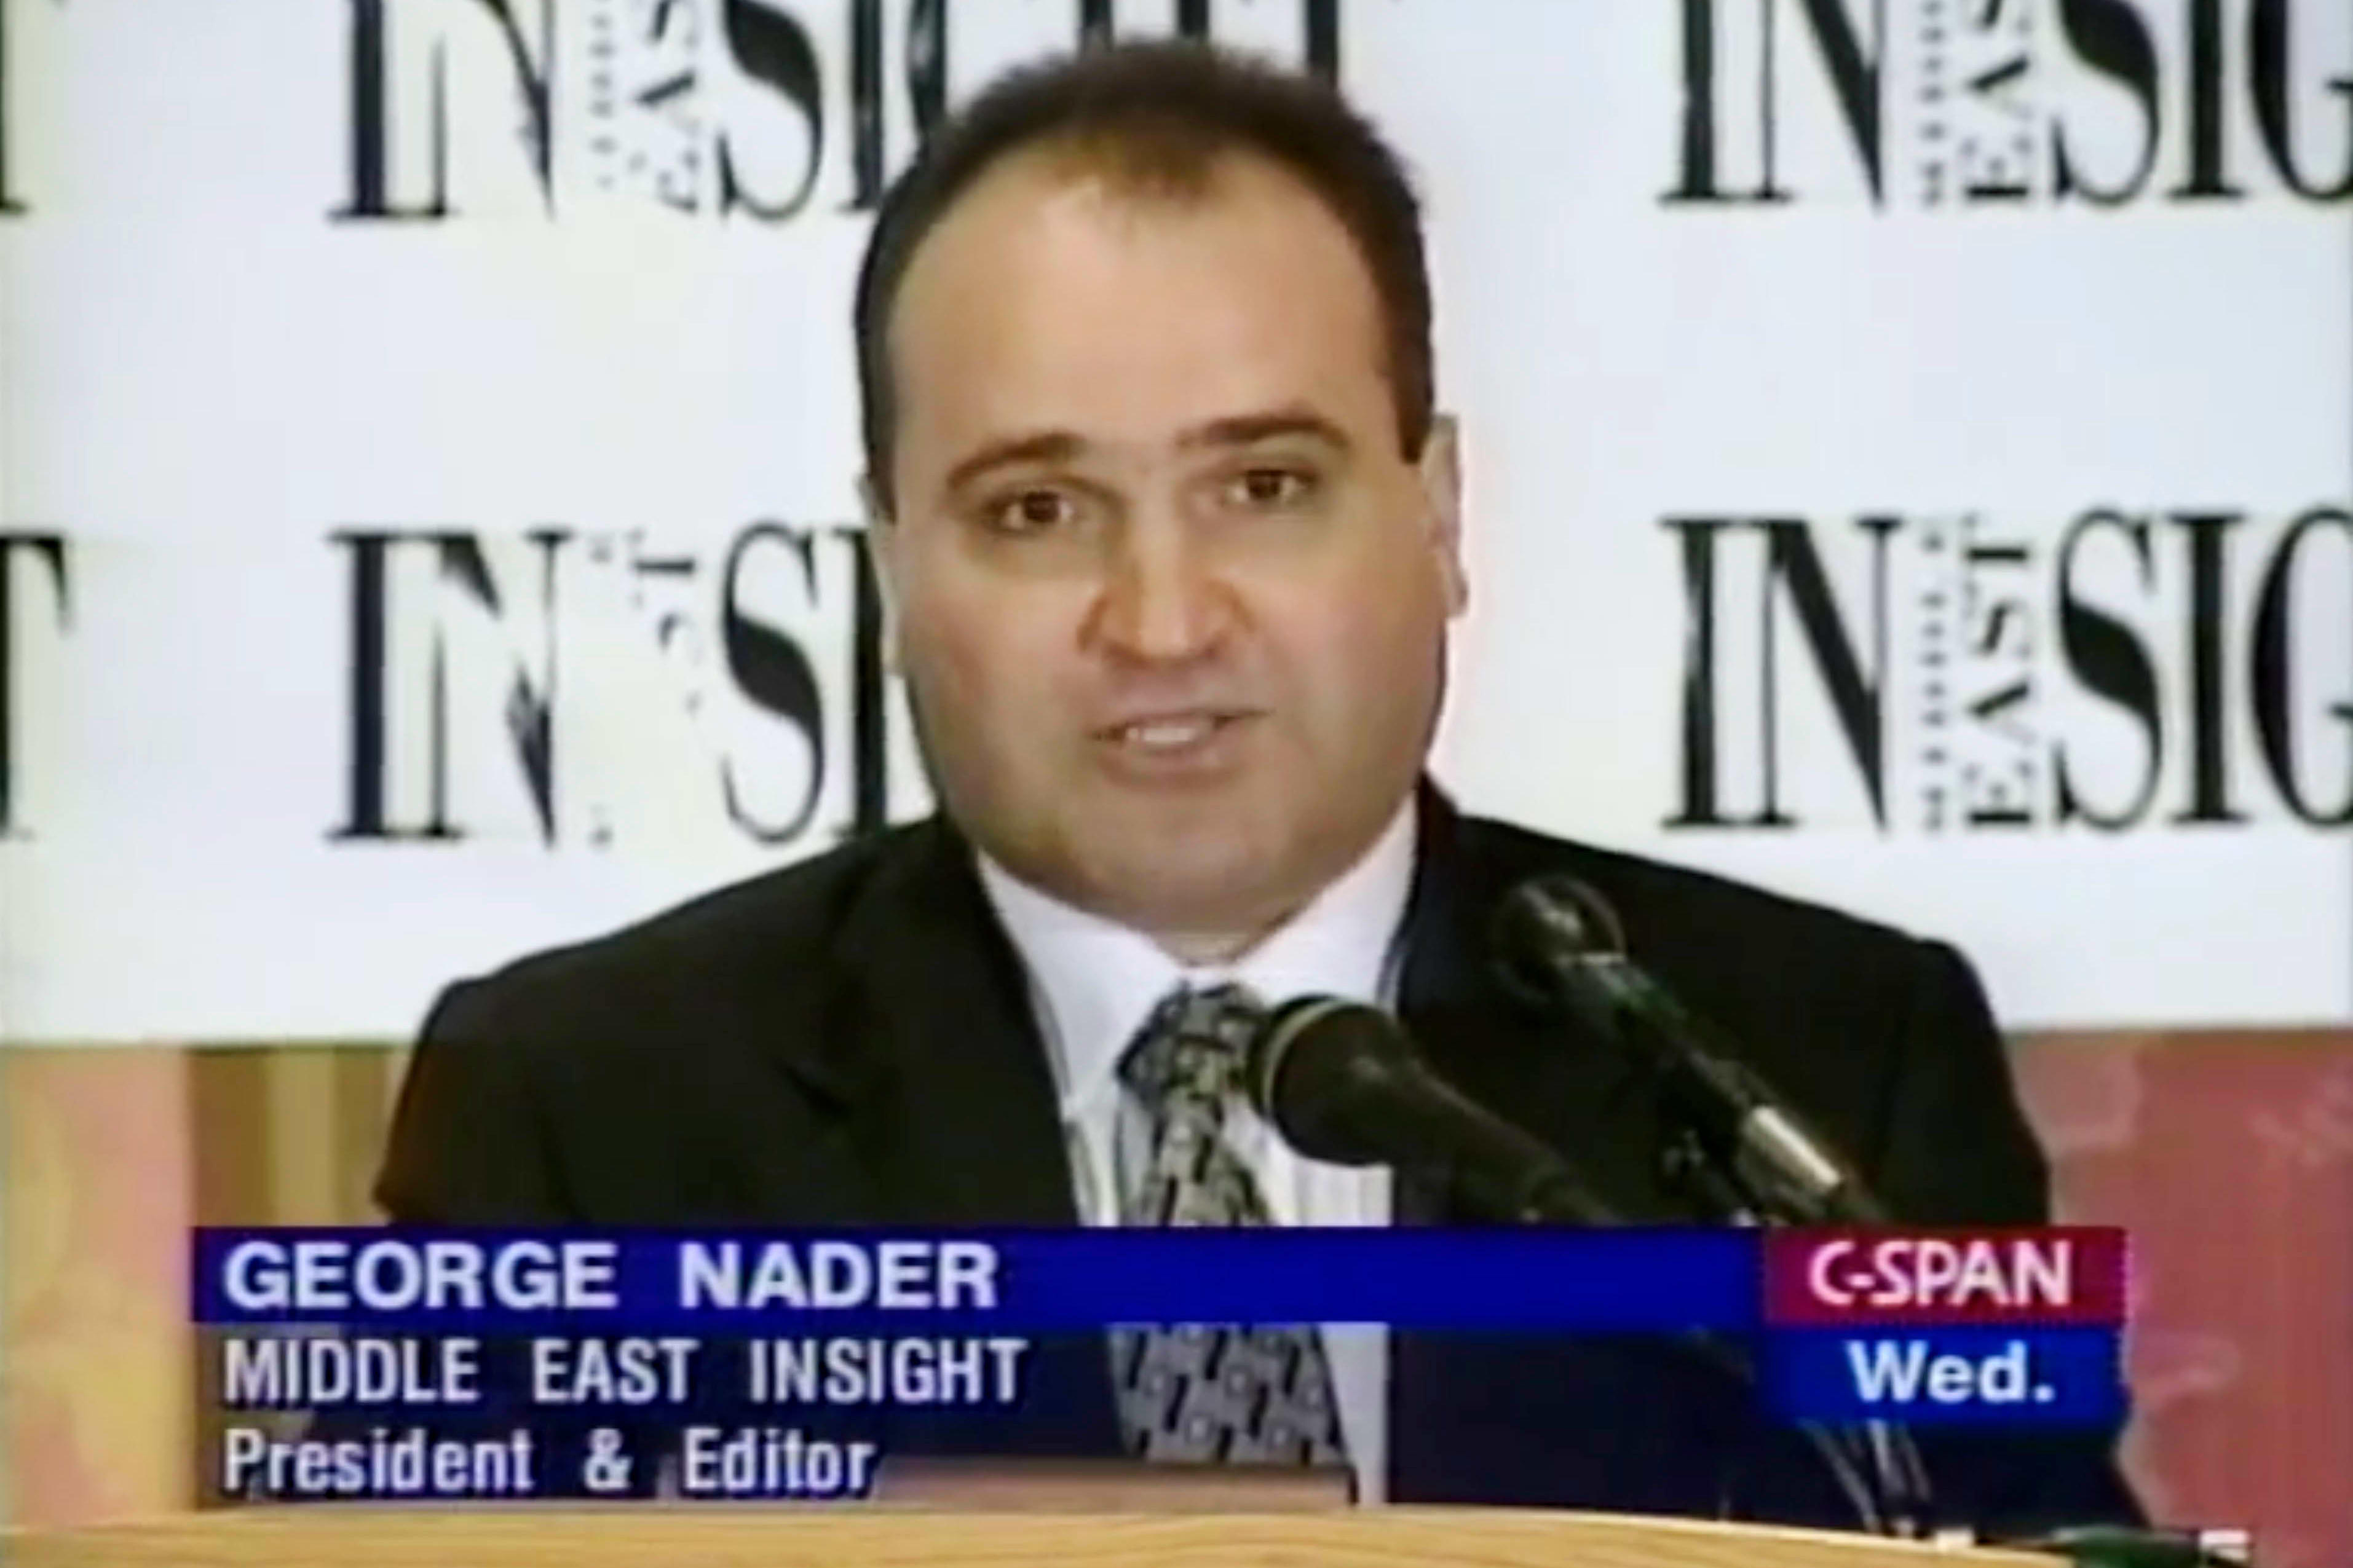 Mueller witness George Nader accused of transporting boy for sex, porn